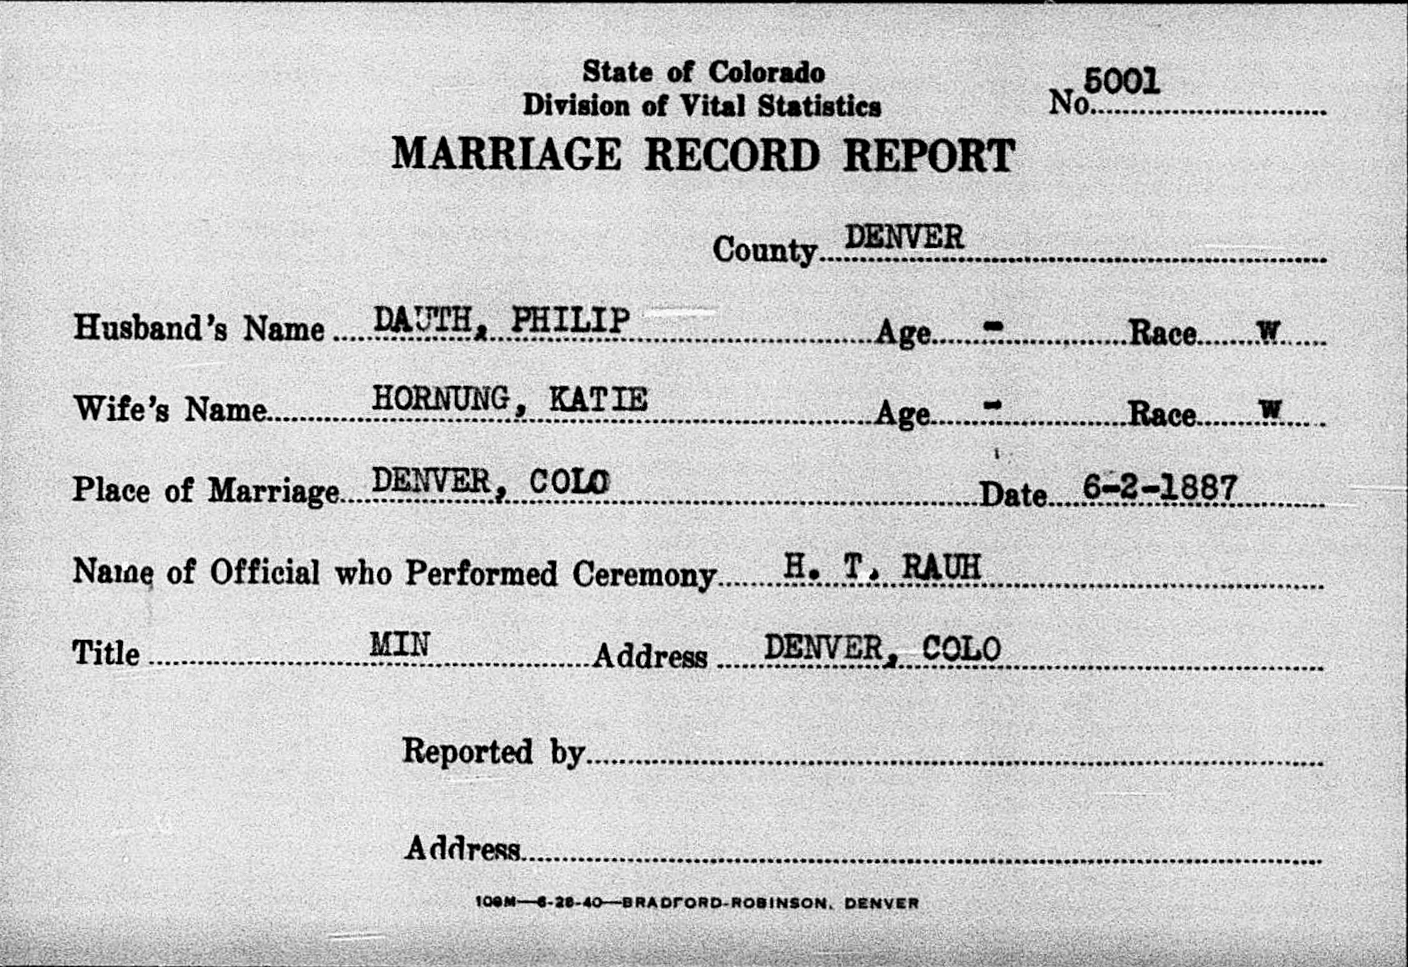 Dauth Family Archive - 1887-06-02 - Philip Dauth Marriage Record